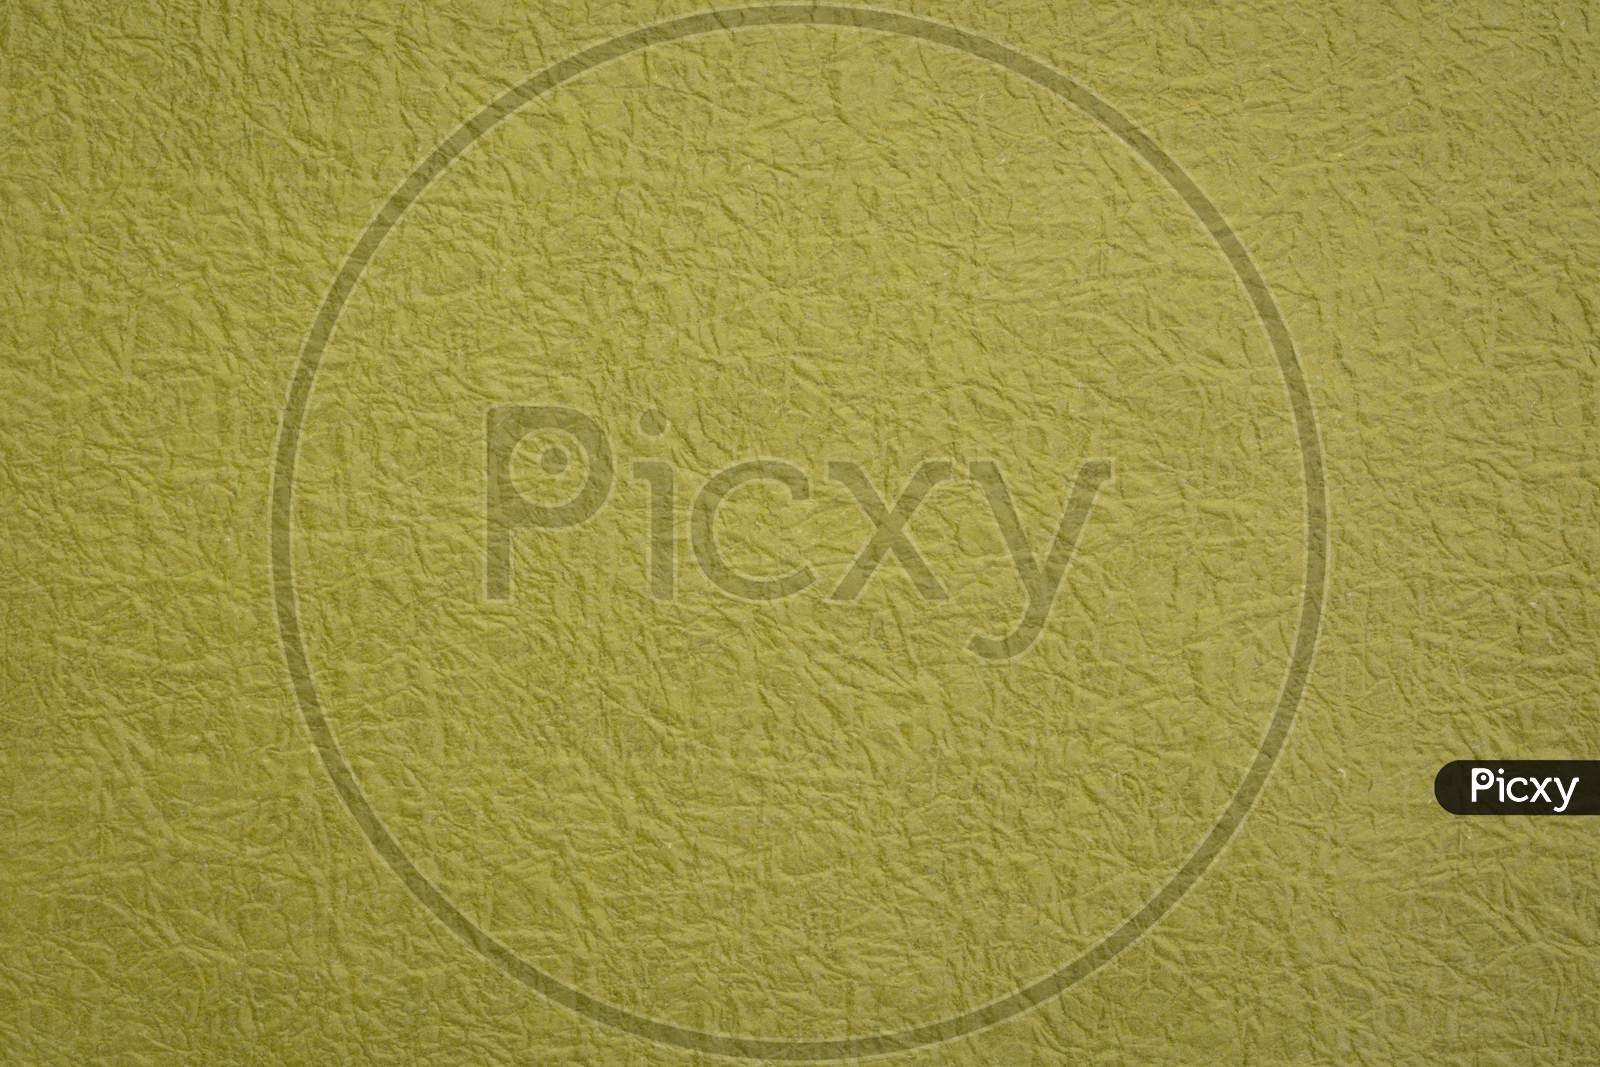 Moss Green Japanese Momi Washi Paper Background Featuring A Rough, Evenly Textured Surface Formed By Crinkling The Paper During The Manufacturing Process